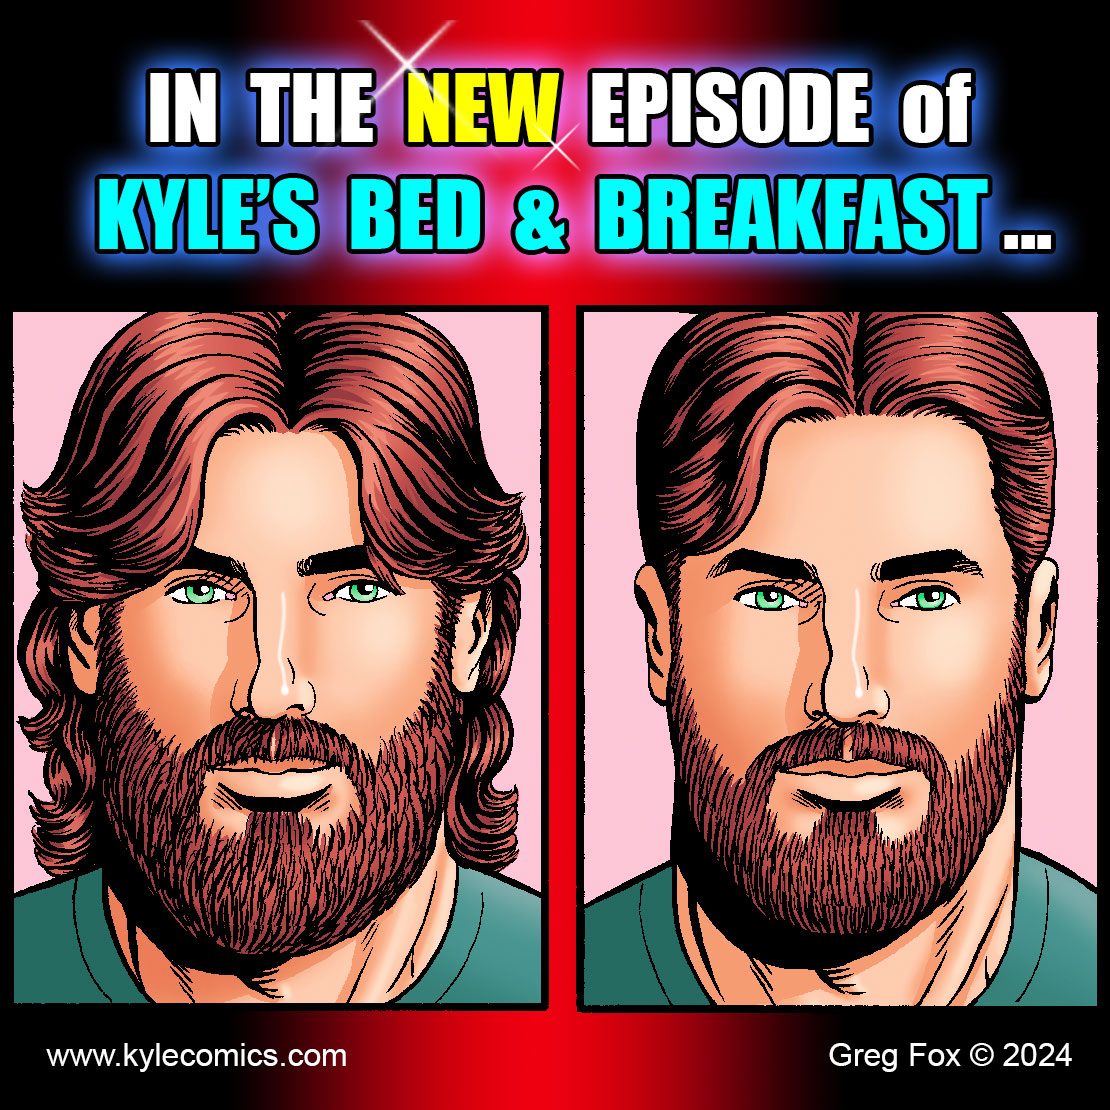 Levi gets his makeover! Will it backfire?✂️Find out in today's new episode of Kyle's B&B! kylecomics.com✂️#GregFox #kylesbnb #webcomic #gaycomics #lgbtqcomics #bara #lgbtqart #webcomics #indiecomics #gaycomicstrip #gaycomicstrips #yaoi #webtoons #makeover #malemakeover